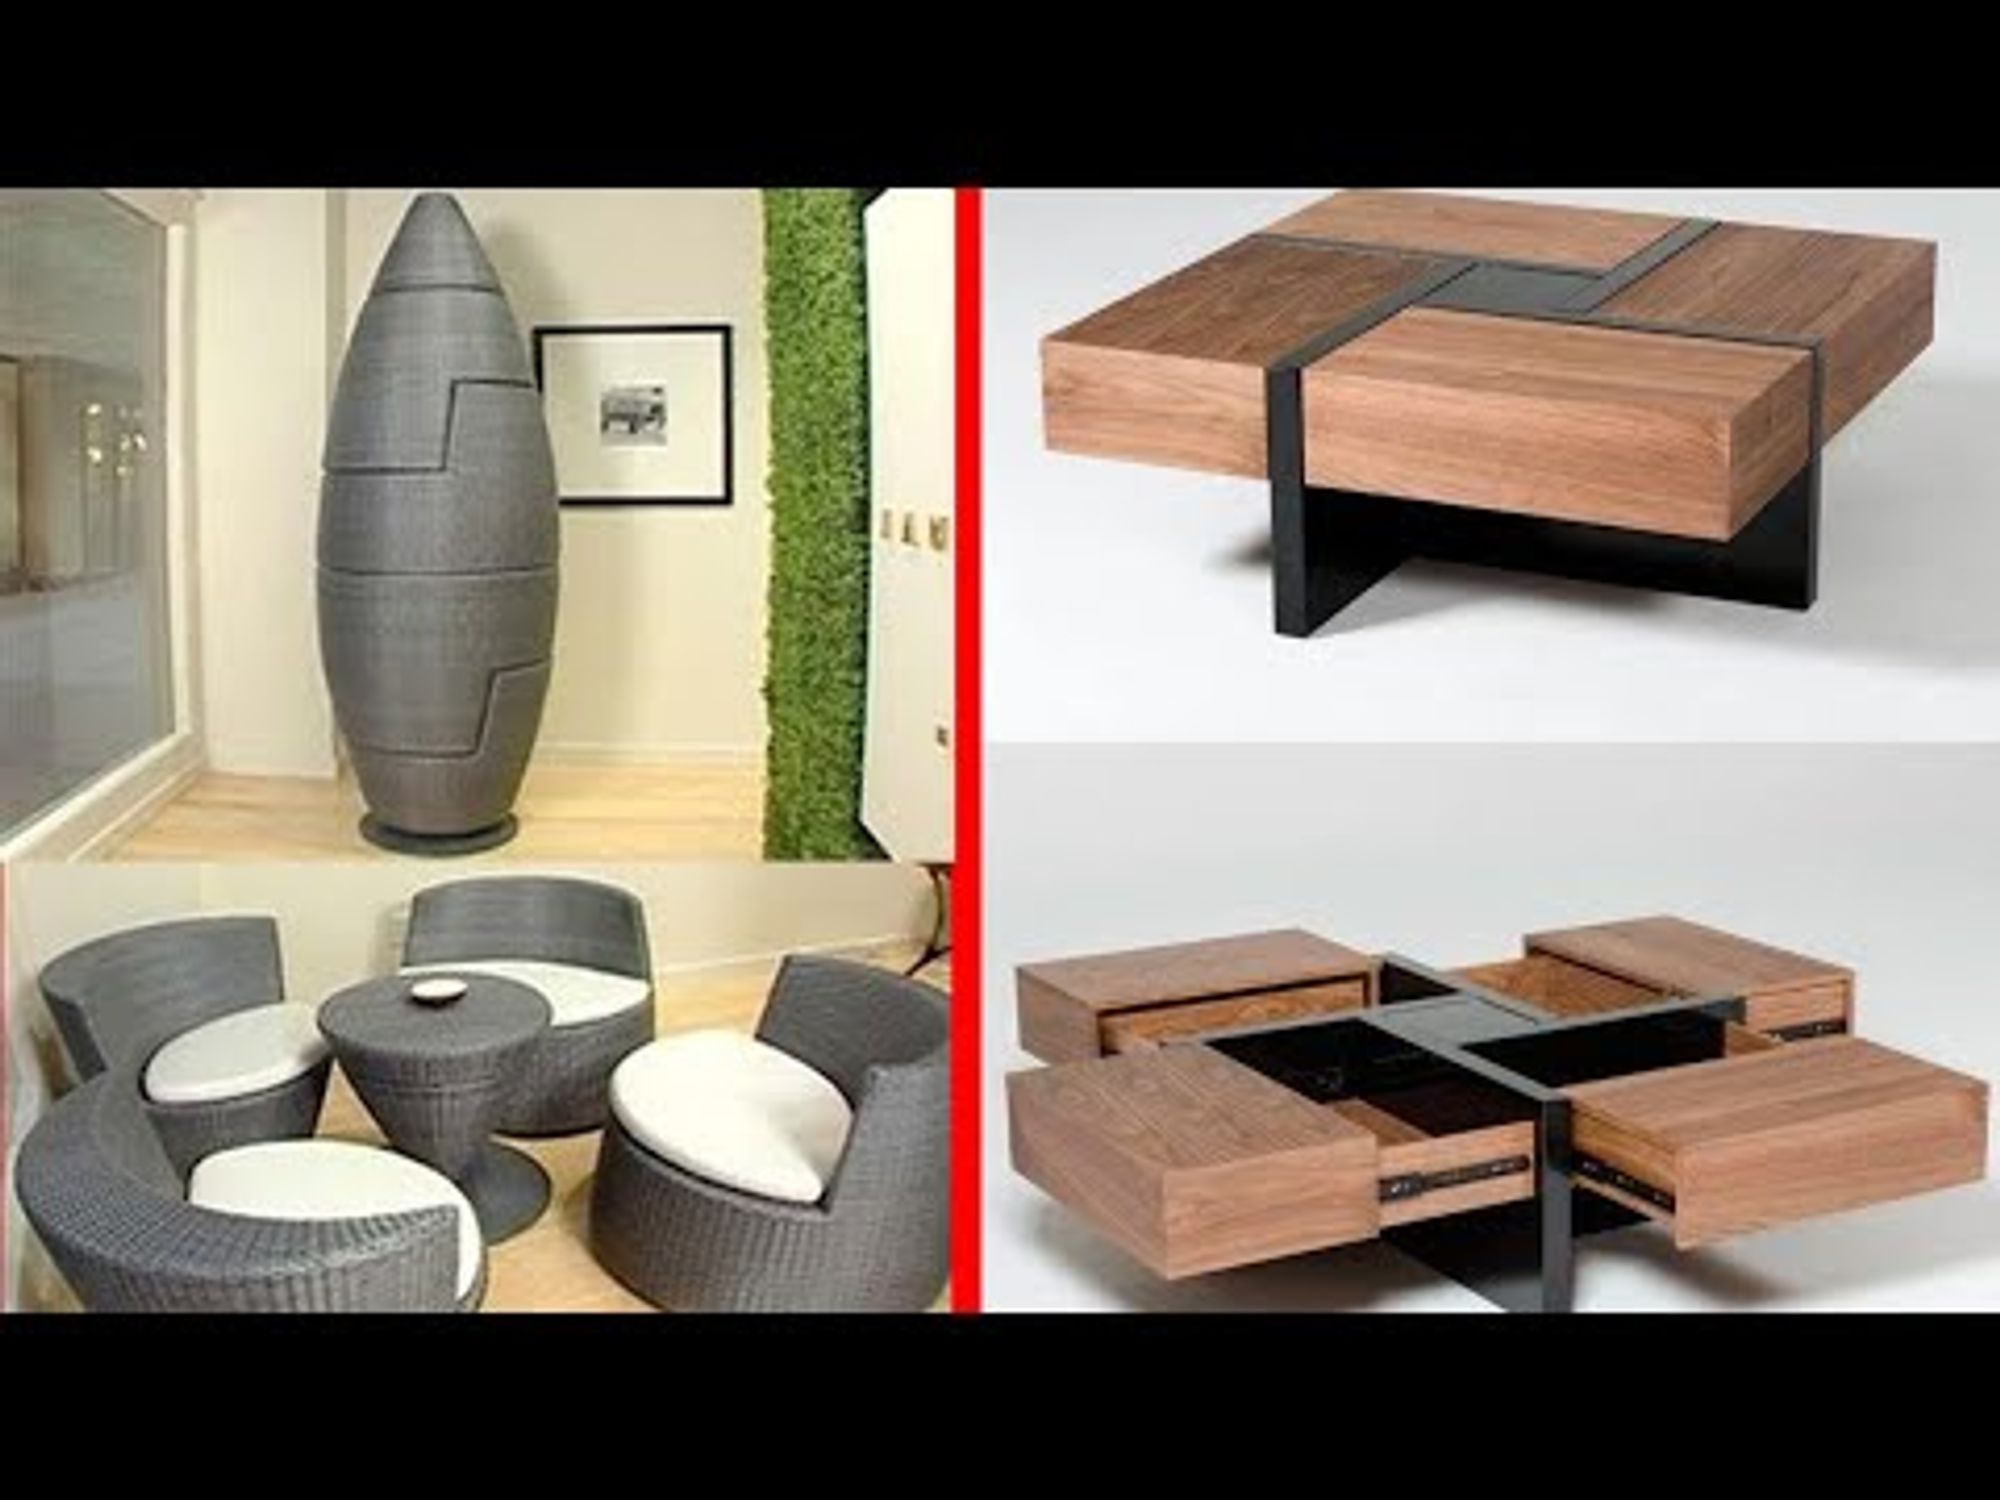 Amazing Expandable Tables - Space Saving Furniture Ideas With Genius Designs